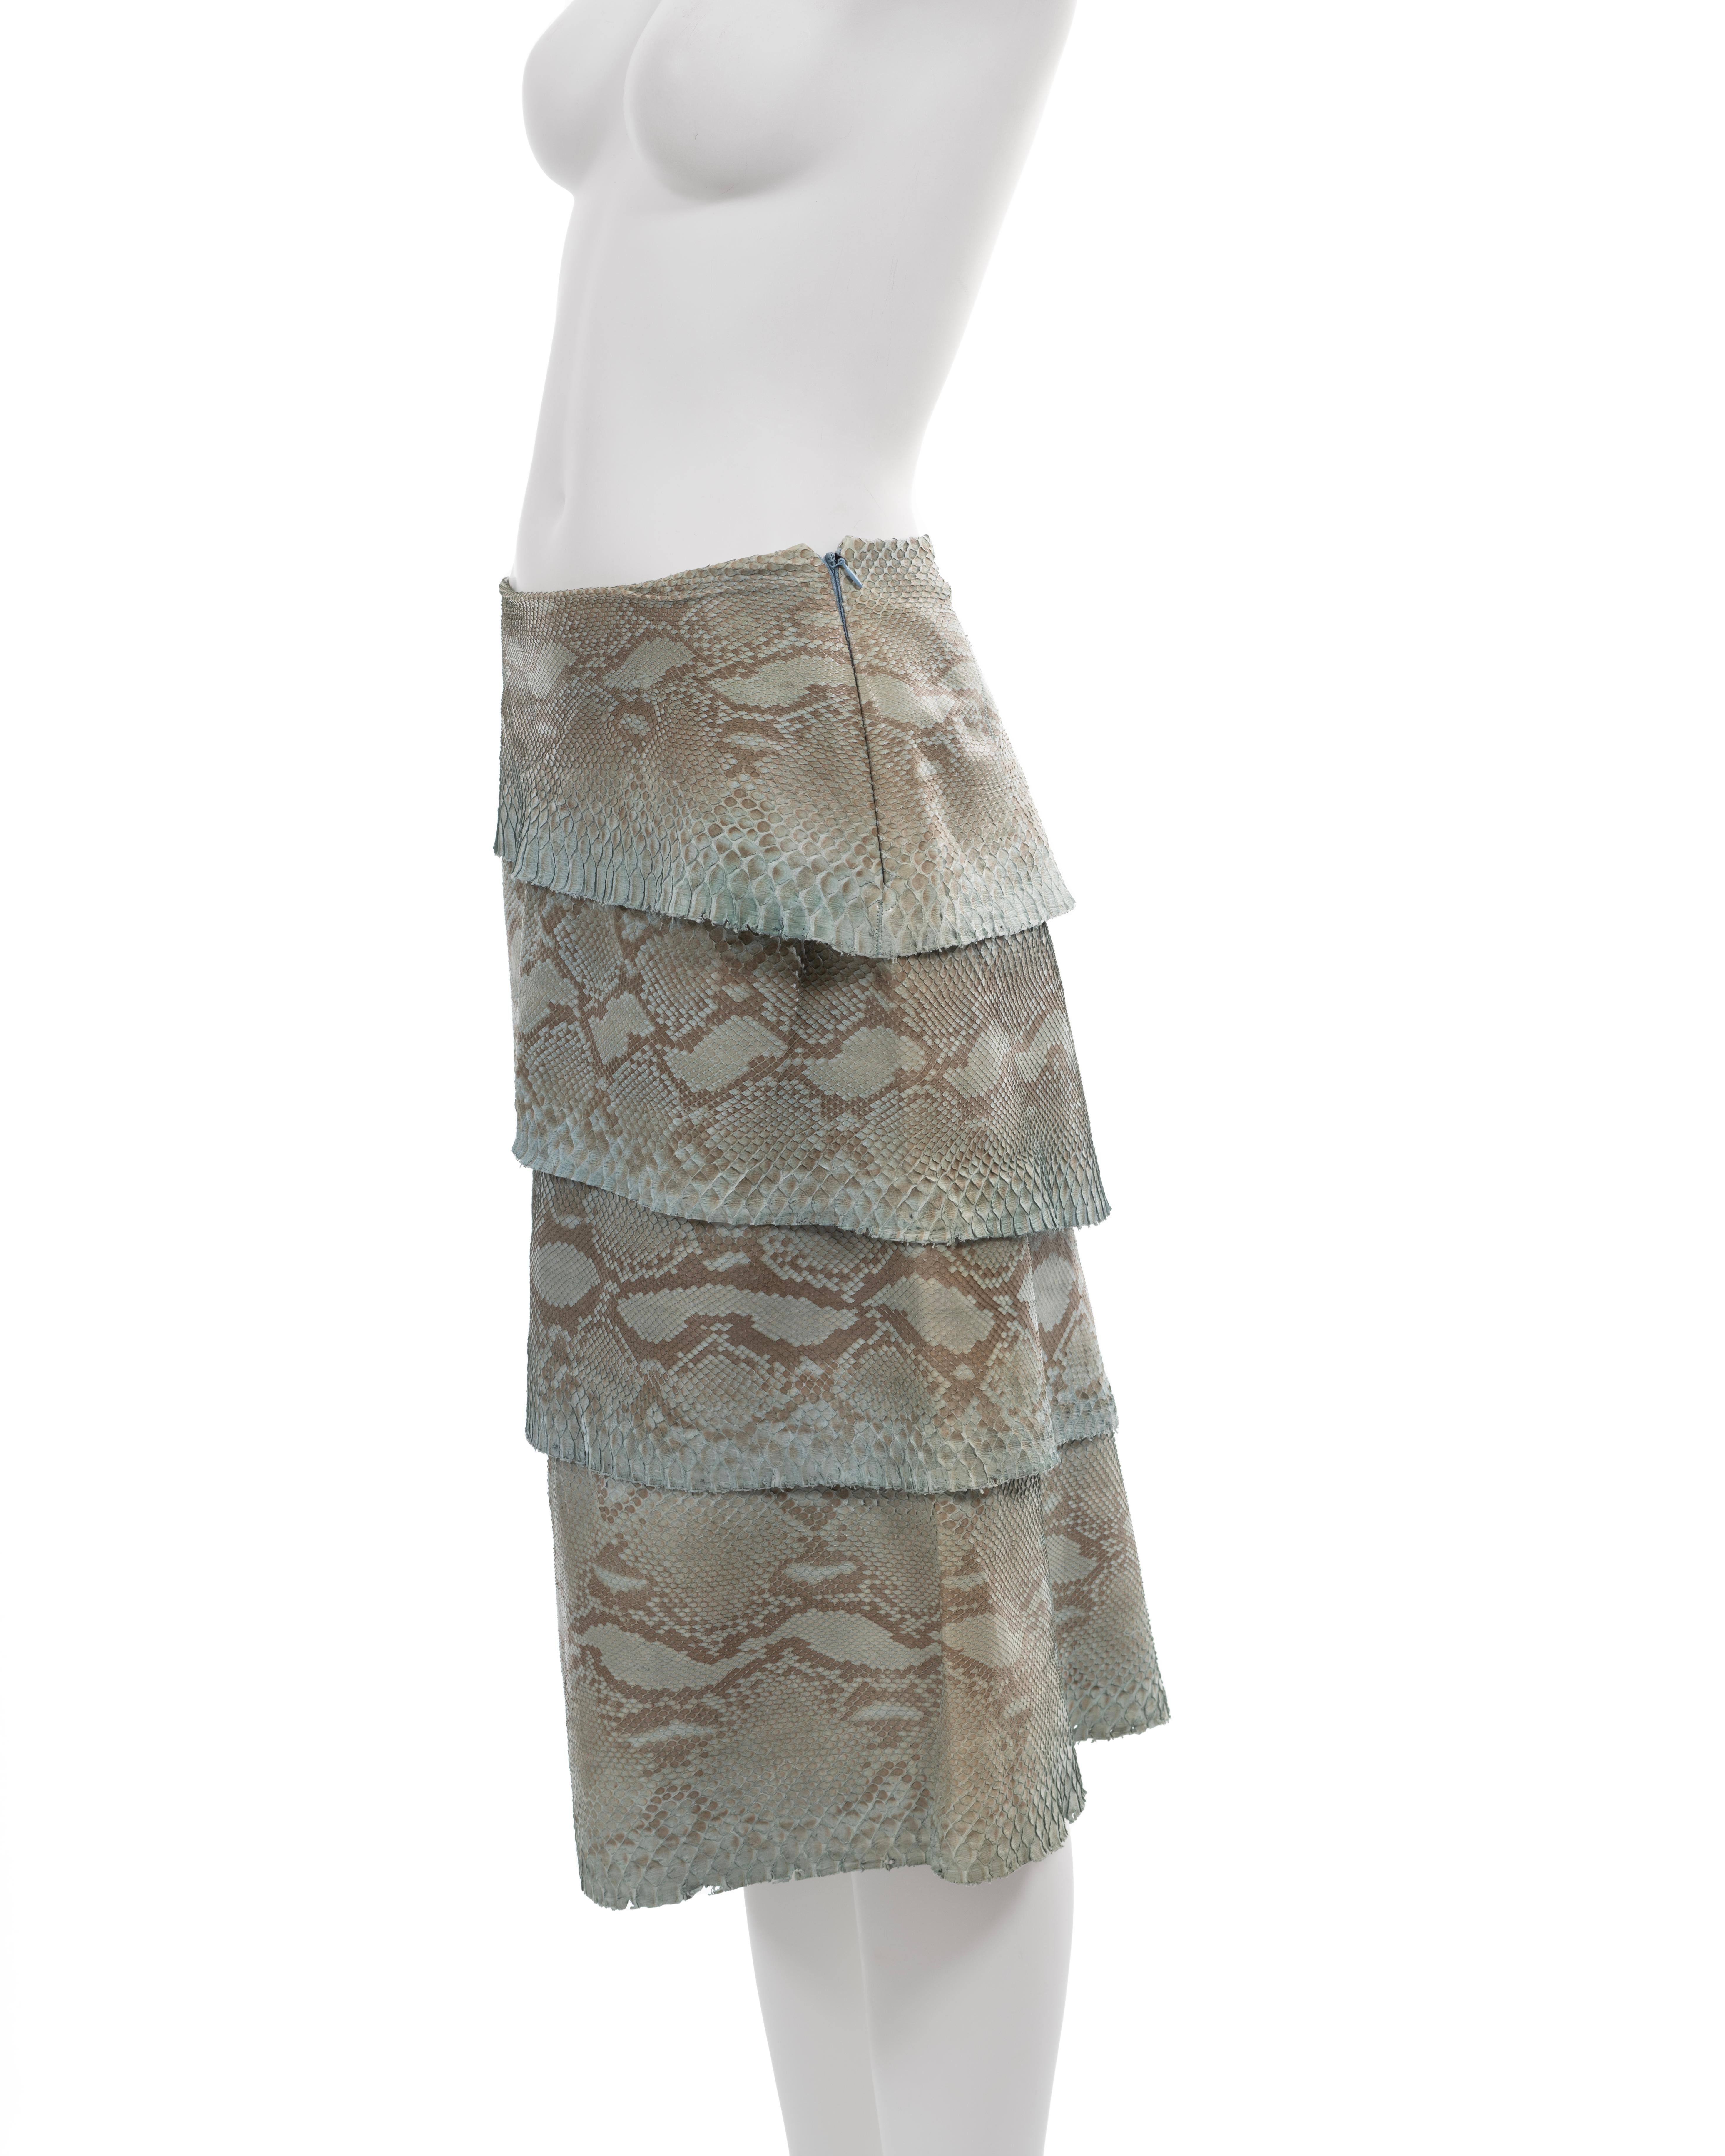 Gianni Versace turquoise python tiered skirt, fw 1999 For Sale 7